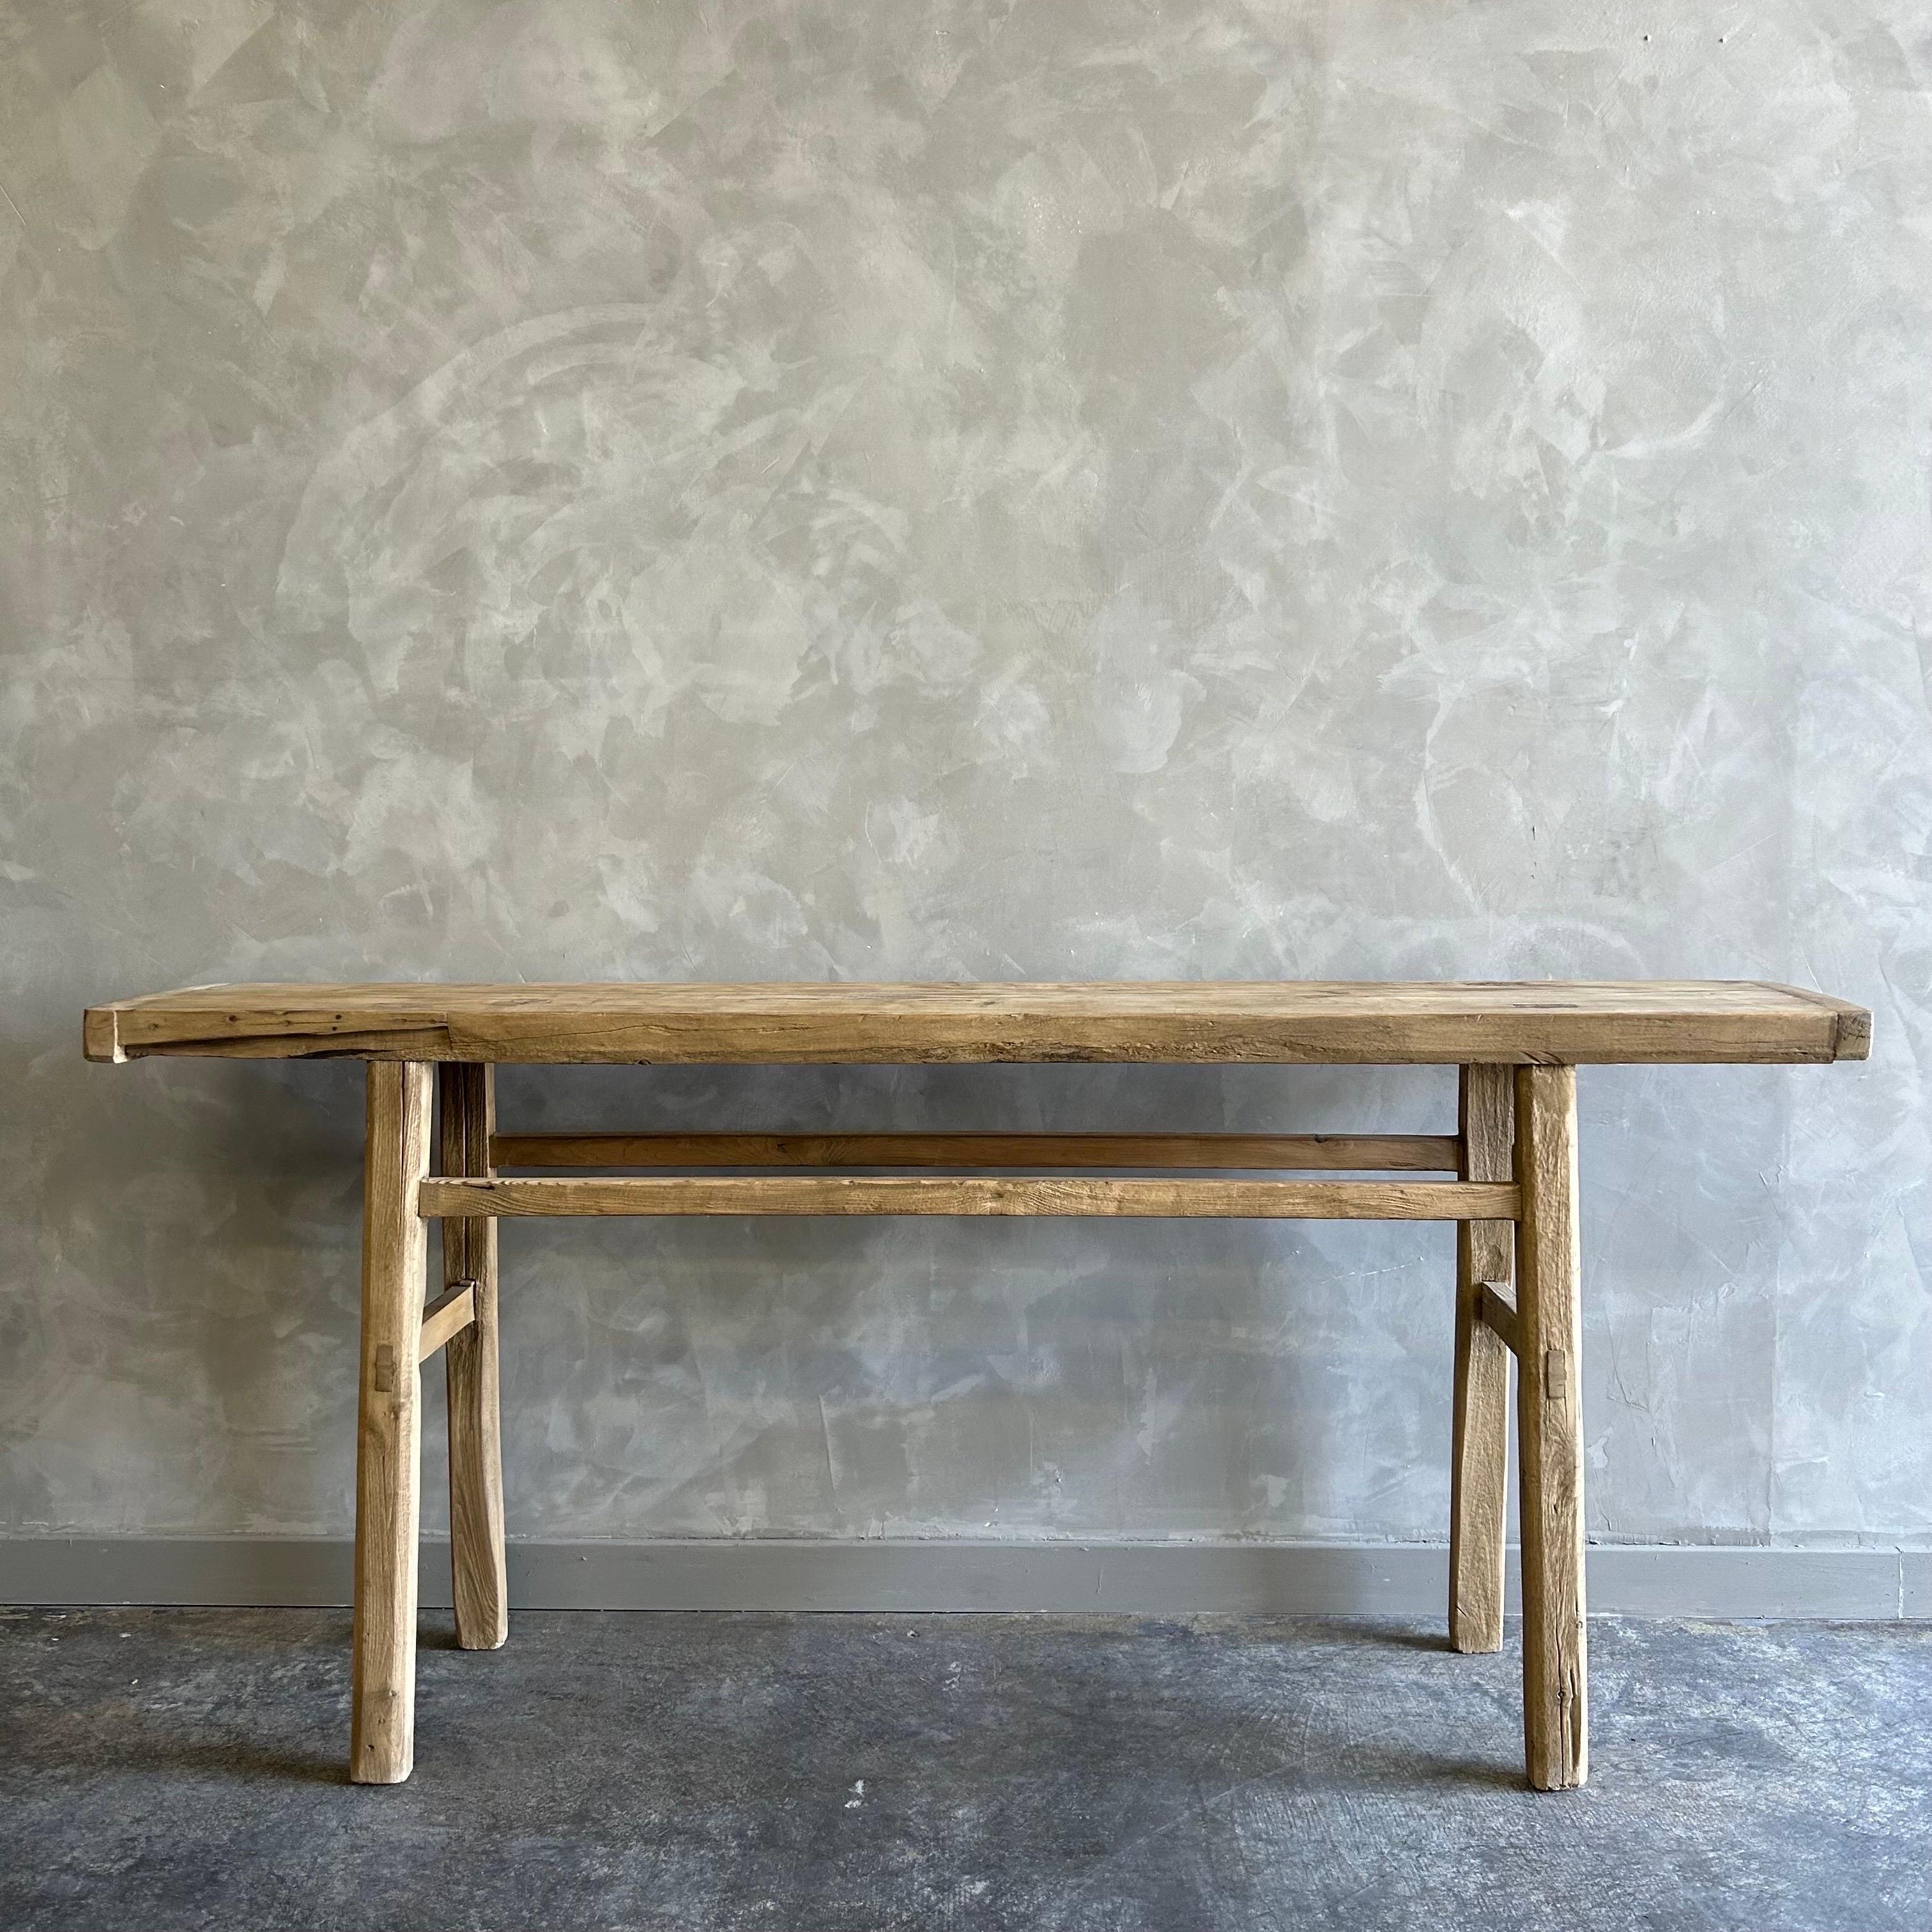 Bloom Home inc has over 2000 items in stock ready for immediate shipping, scroll down to view all of our items!
Elm console 74.5”w x 12.5”d x 33”h
Vintage Antique Elm Wood Console Table Made from Vintage reclaimed elm wood. Beautiful antique